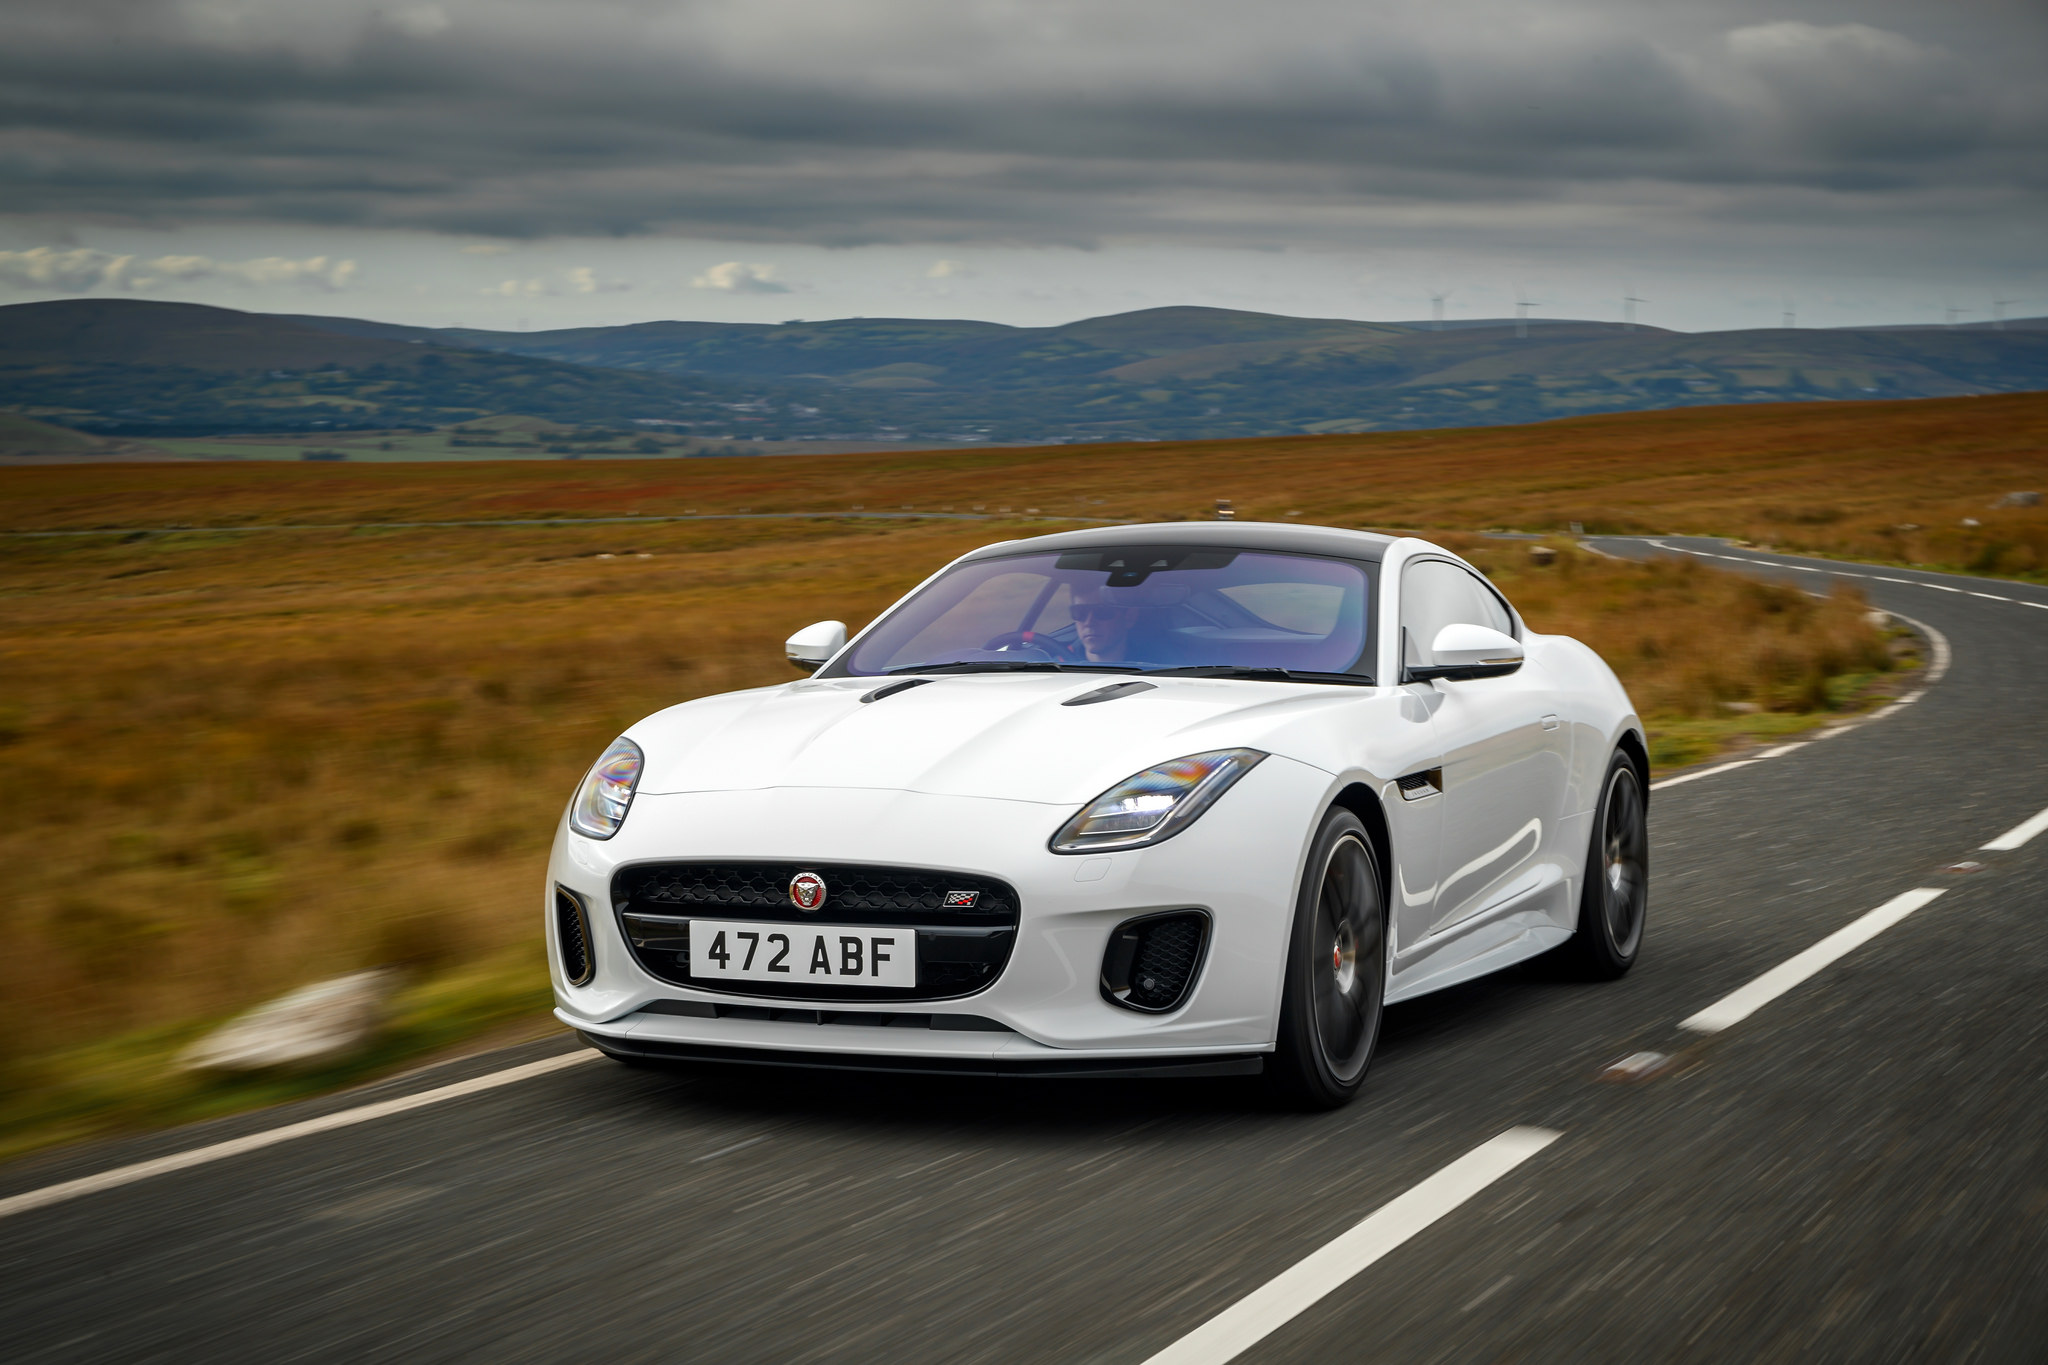 Chequered Flag Limited Edition Celebrates 70 Years of Jaguar Sports Cars